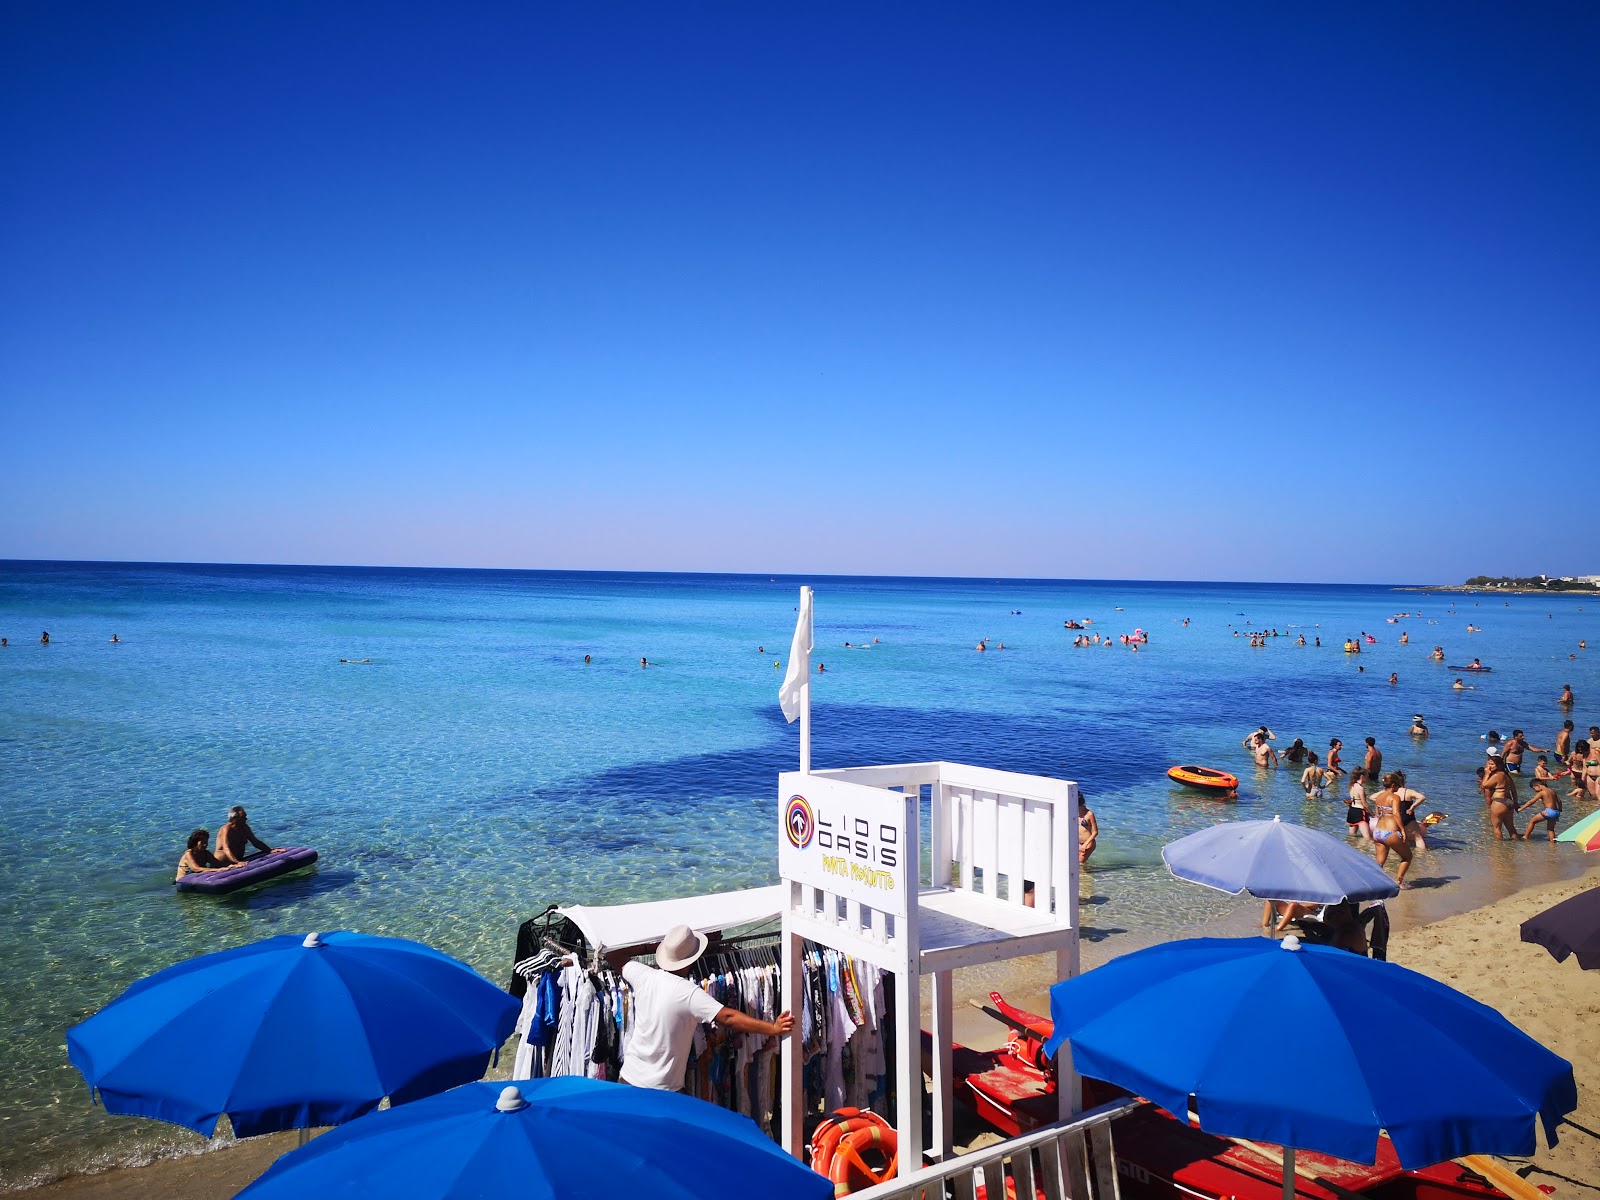 Photo of Spiaggia di Punta Prosciutto - popular place among relax connoisseurs